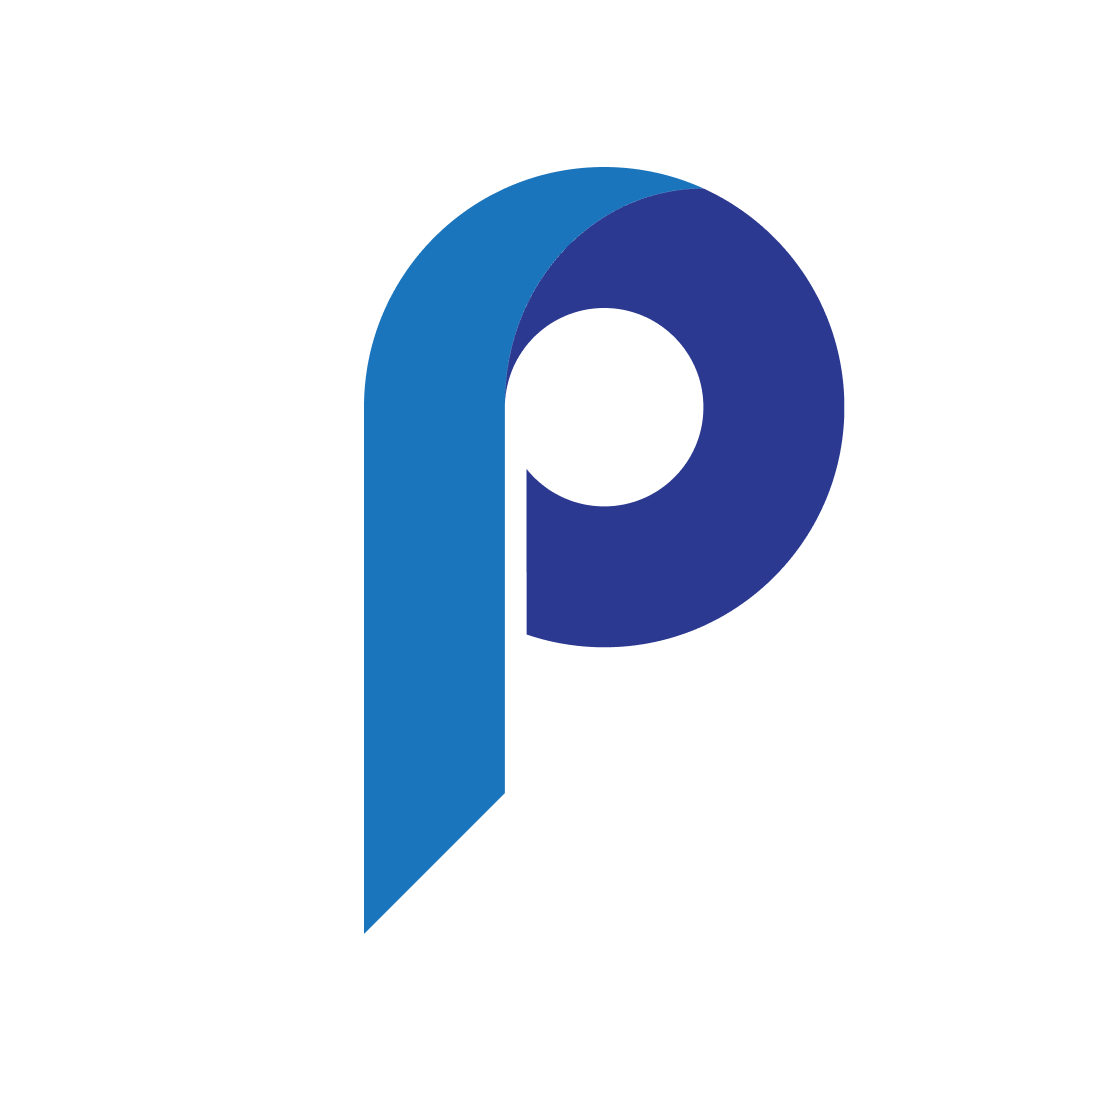 P Letter logo preview image.